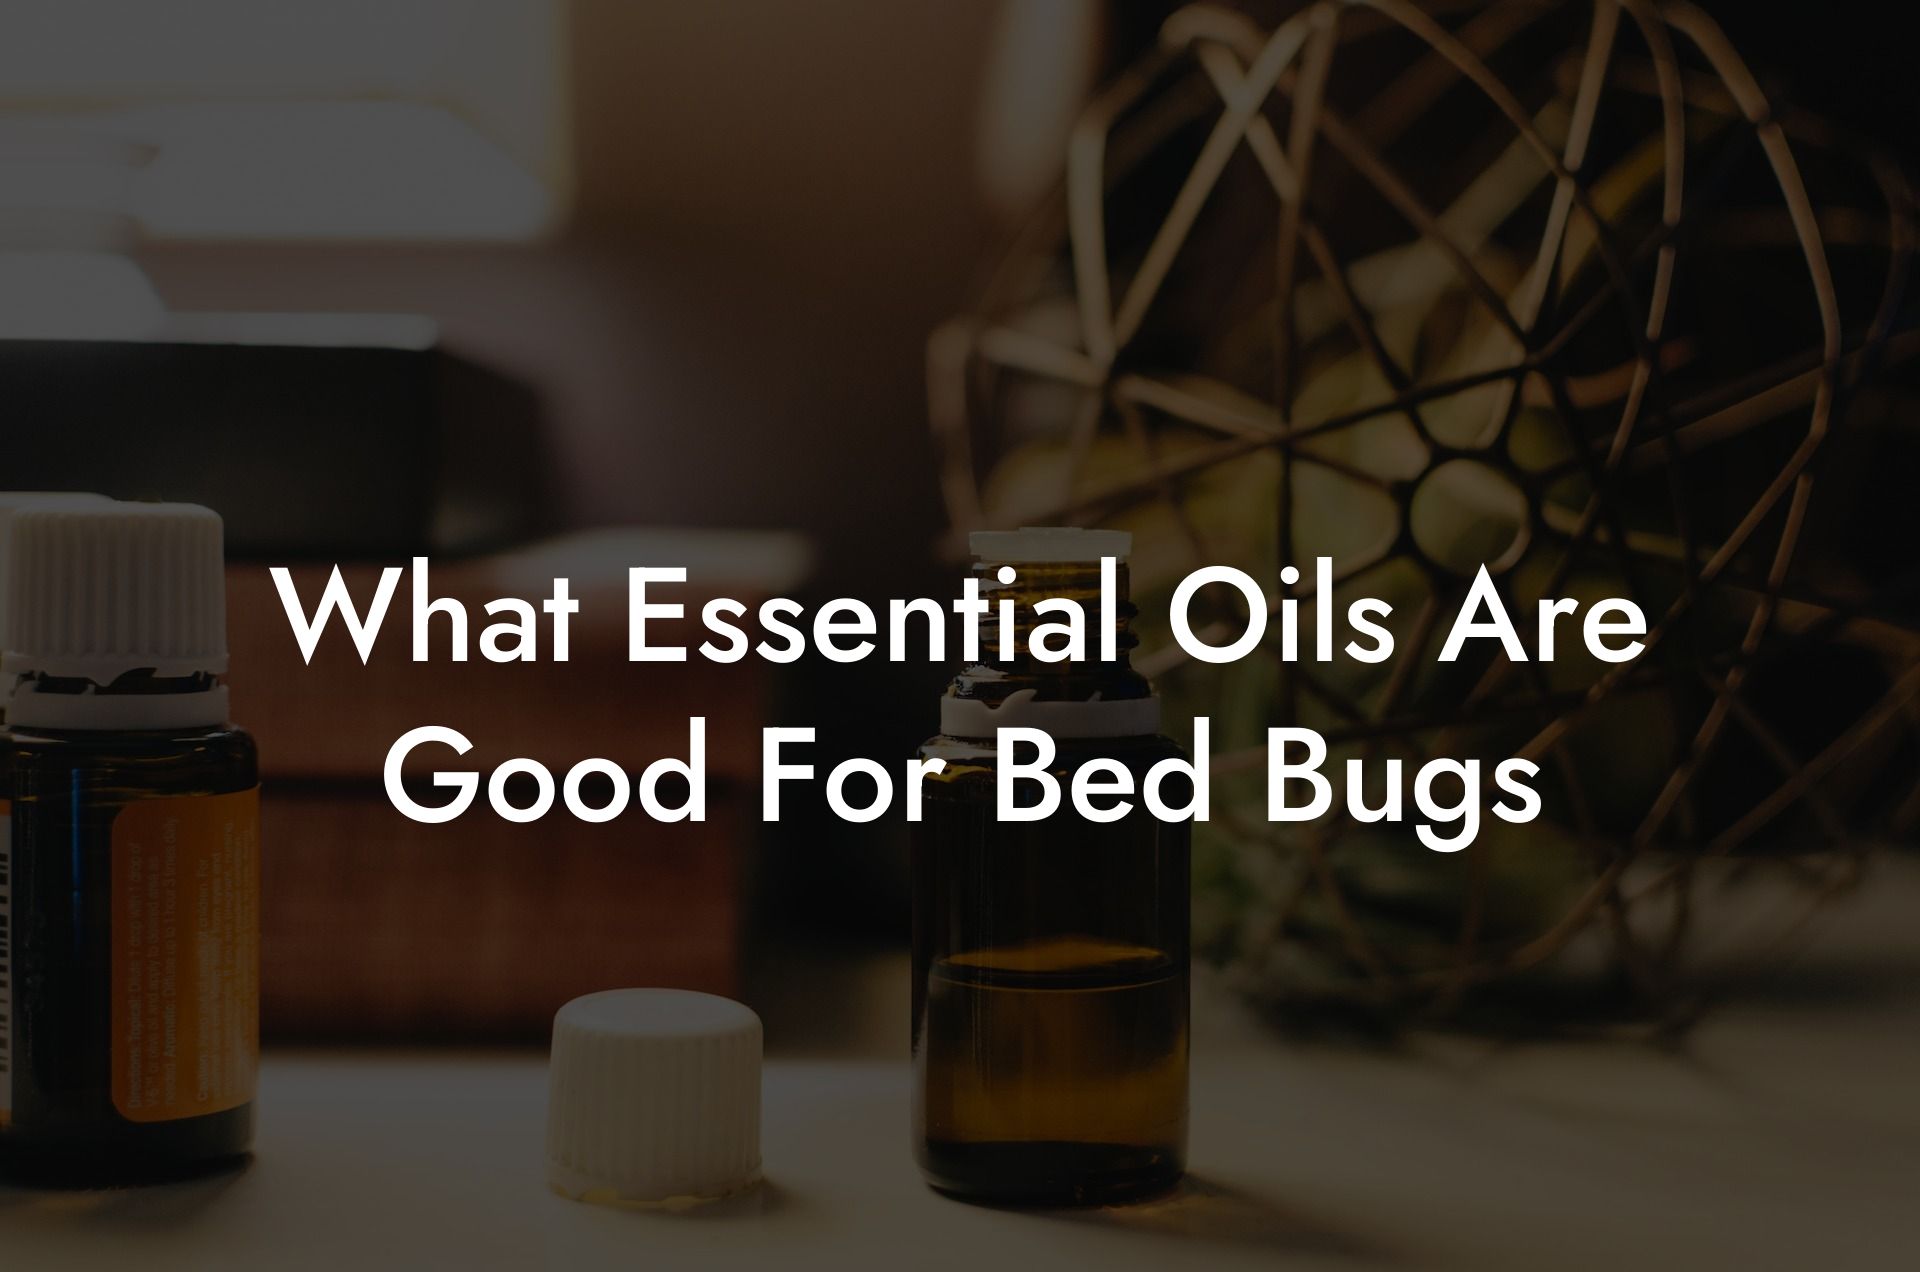 What Essential Oils Are Good For Bed Bugs